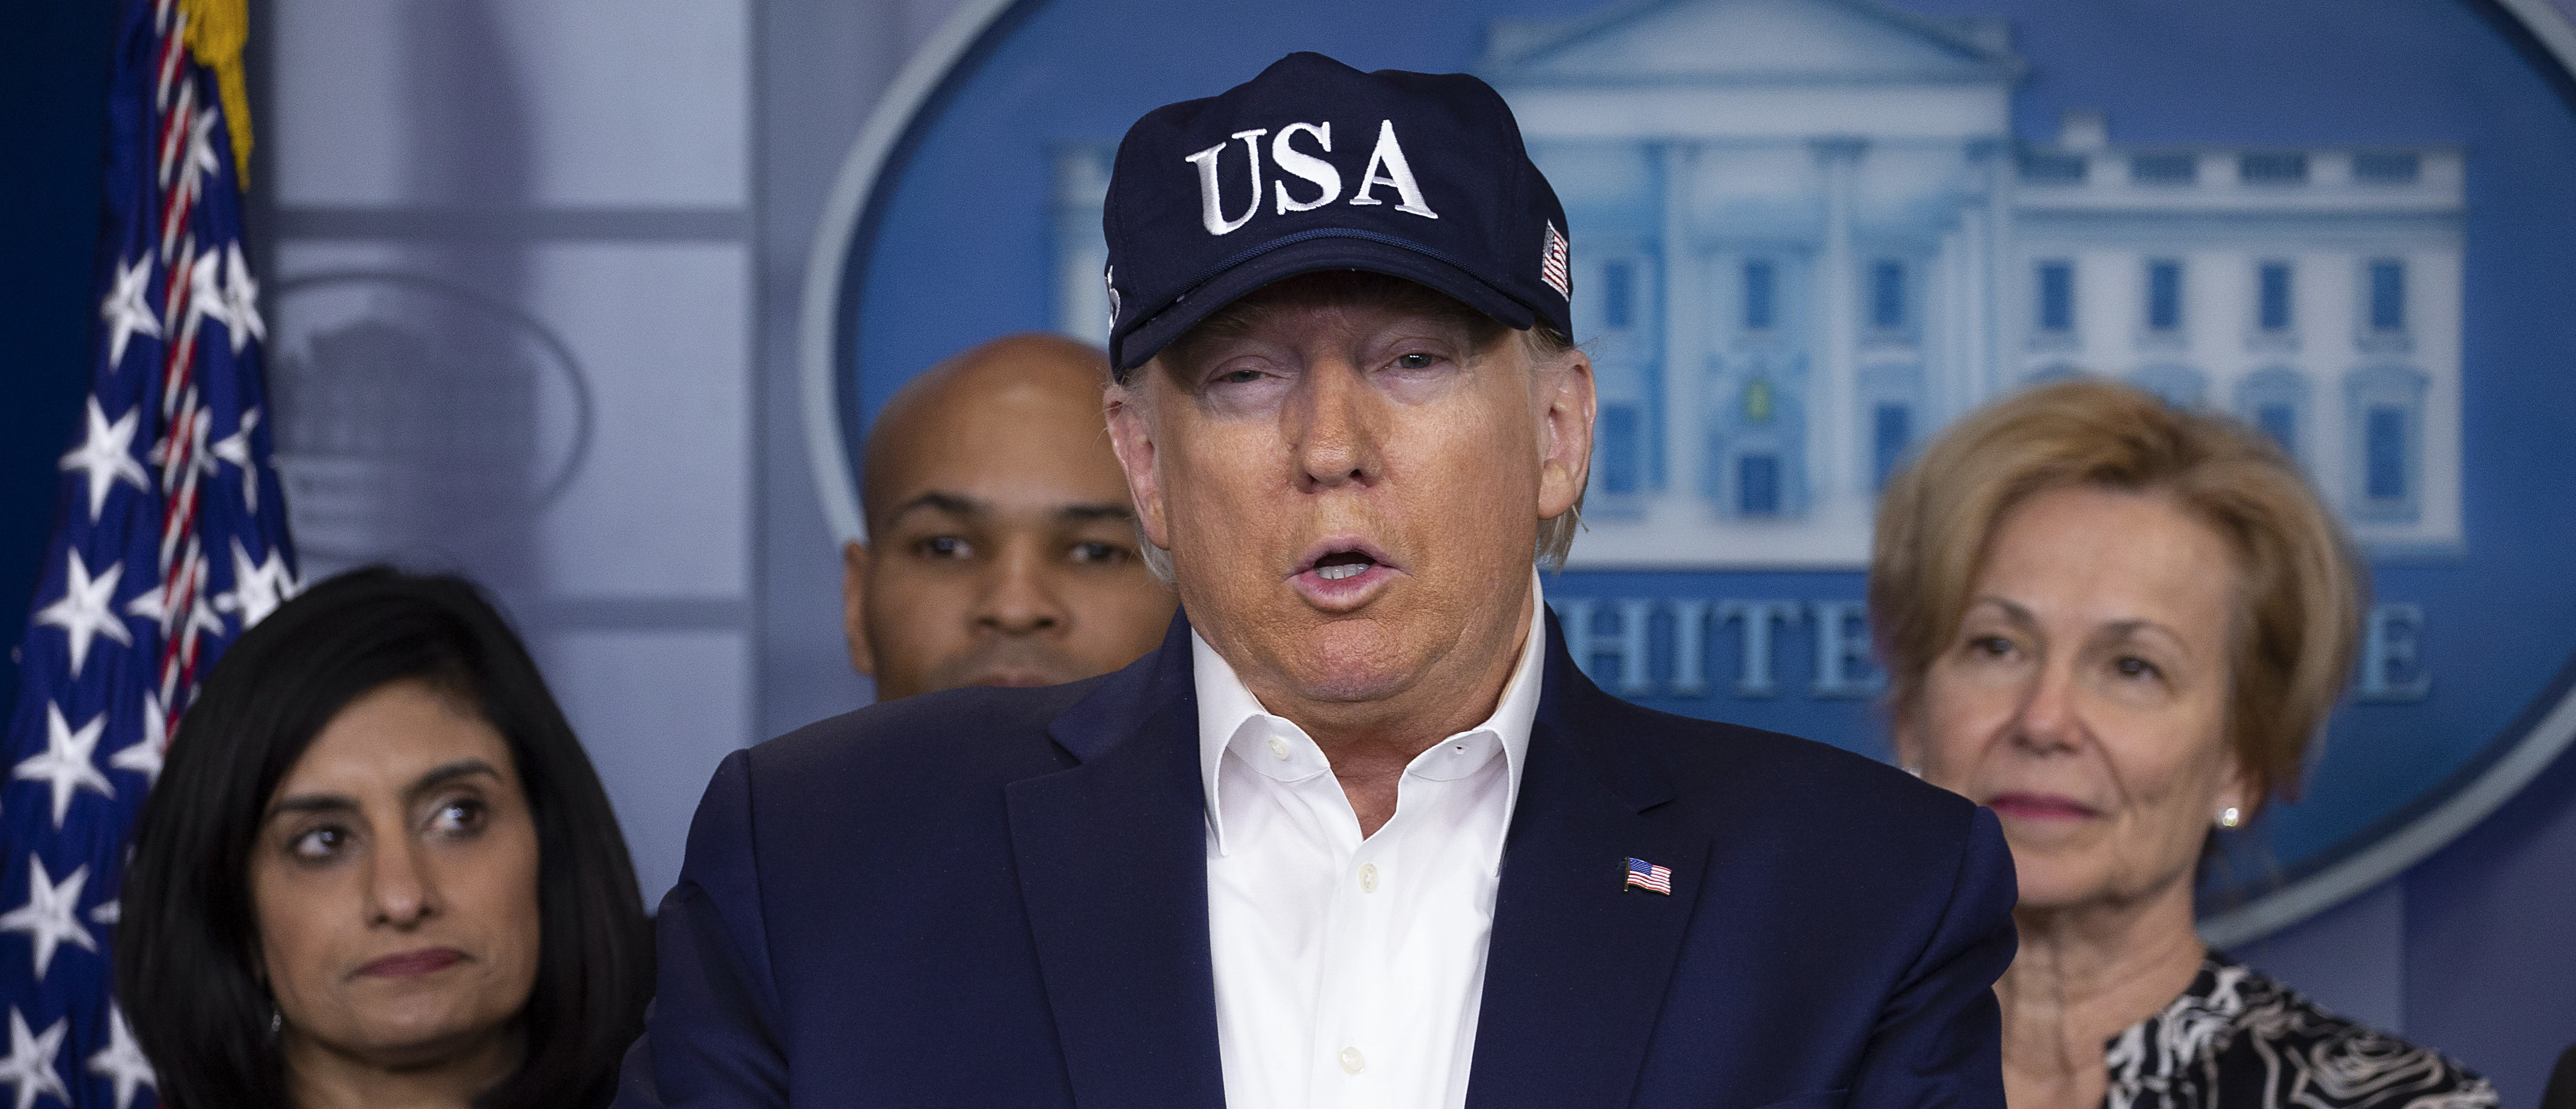 U.S. President Donald Trump speaks in the press briefing room at the White House on March 14, 2020 in Washington, DC. (Tasos Katopodis/Getty Images)